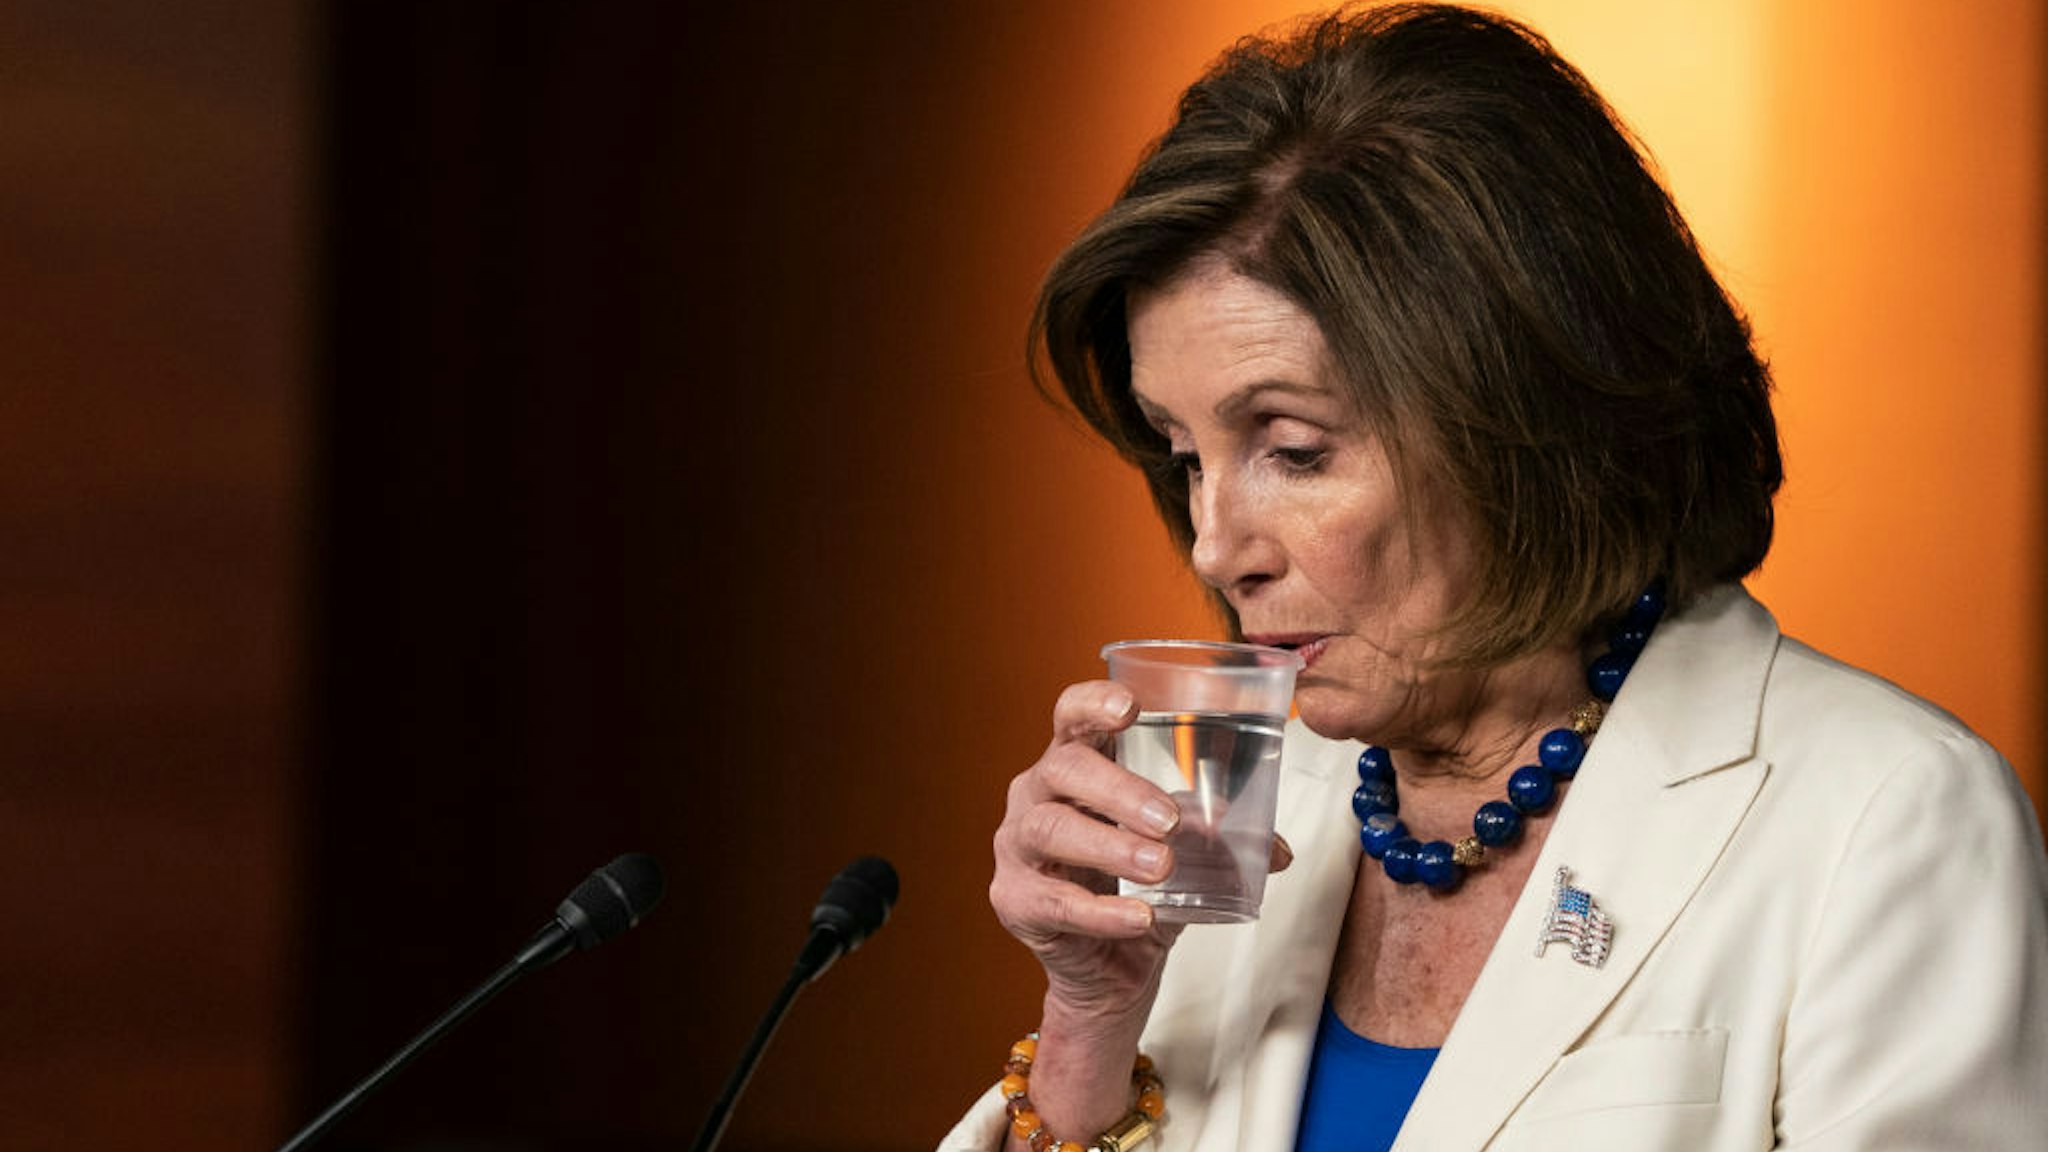 House Speaker Nancy Pelosi (D-CA) takes a sip of water as she speaks to the media during her weekly press conference at the U.S. Capitol on November 21, 2019 in Washington, DC. Pelosi spoke about her legislative plans through the new year and the lack of progress she feels the Senate is making on passing legislation the House has already passed. She then took questions. (Photo by Alex Edelman/Getty Images)